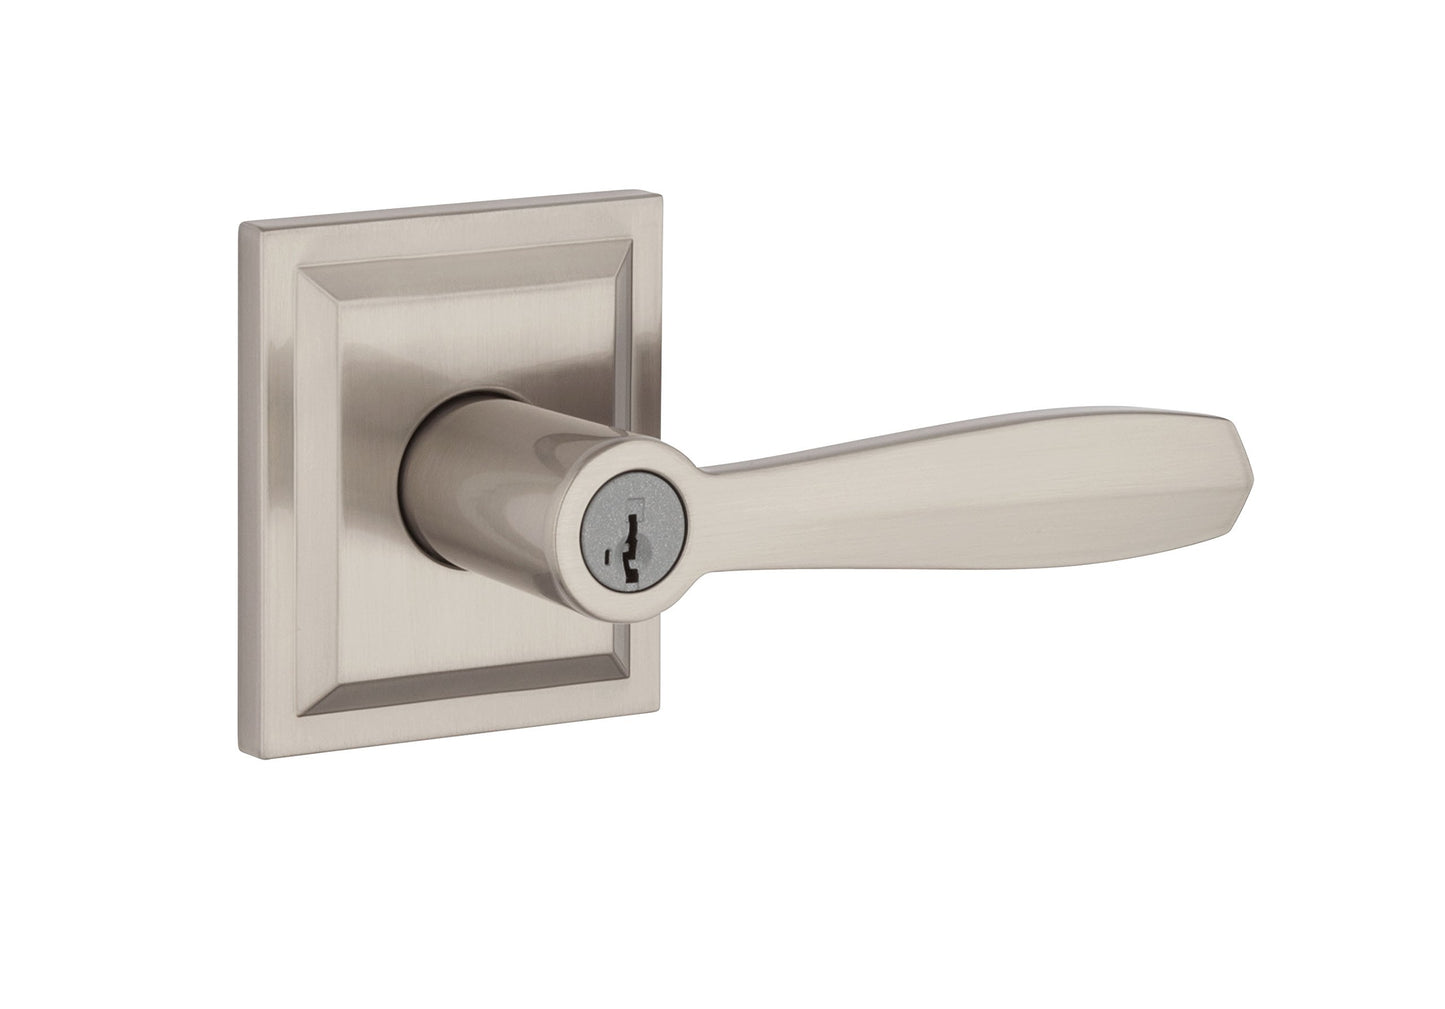 Baldwin Torrey, Entry Door Handle Reversible Lever with Keyed Lock Featuring SmartKey Re-key Technology and Microban Protection, in Satin Nickel - Like New